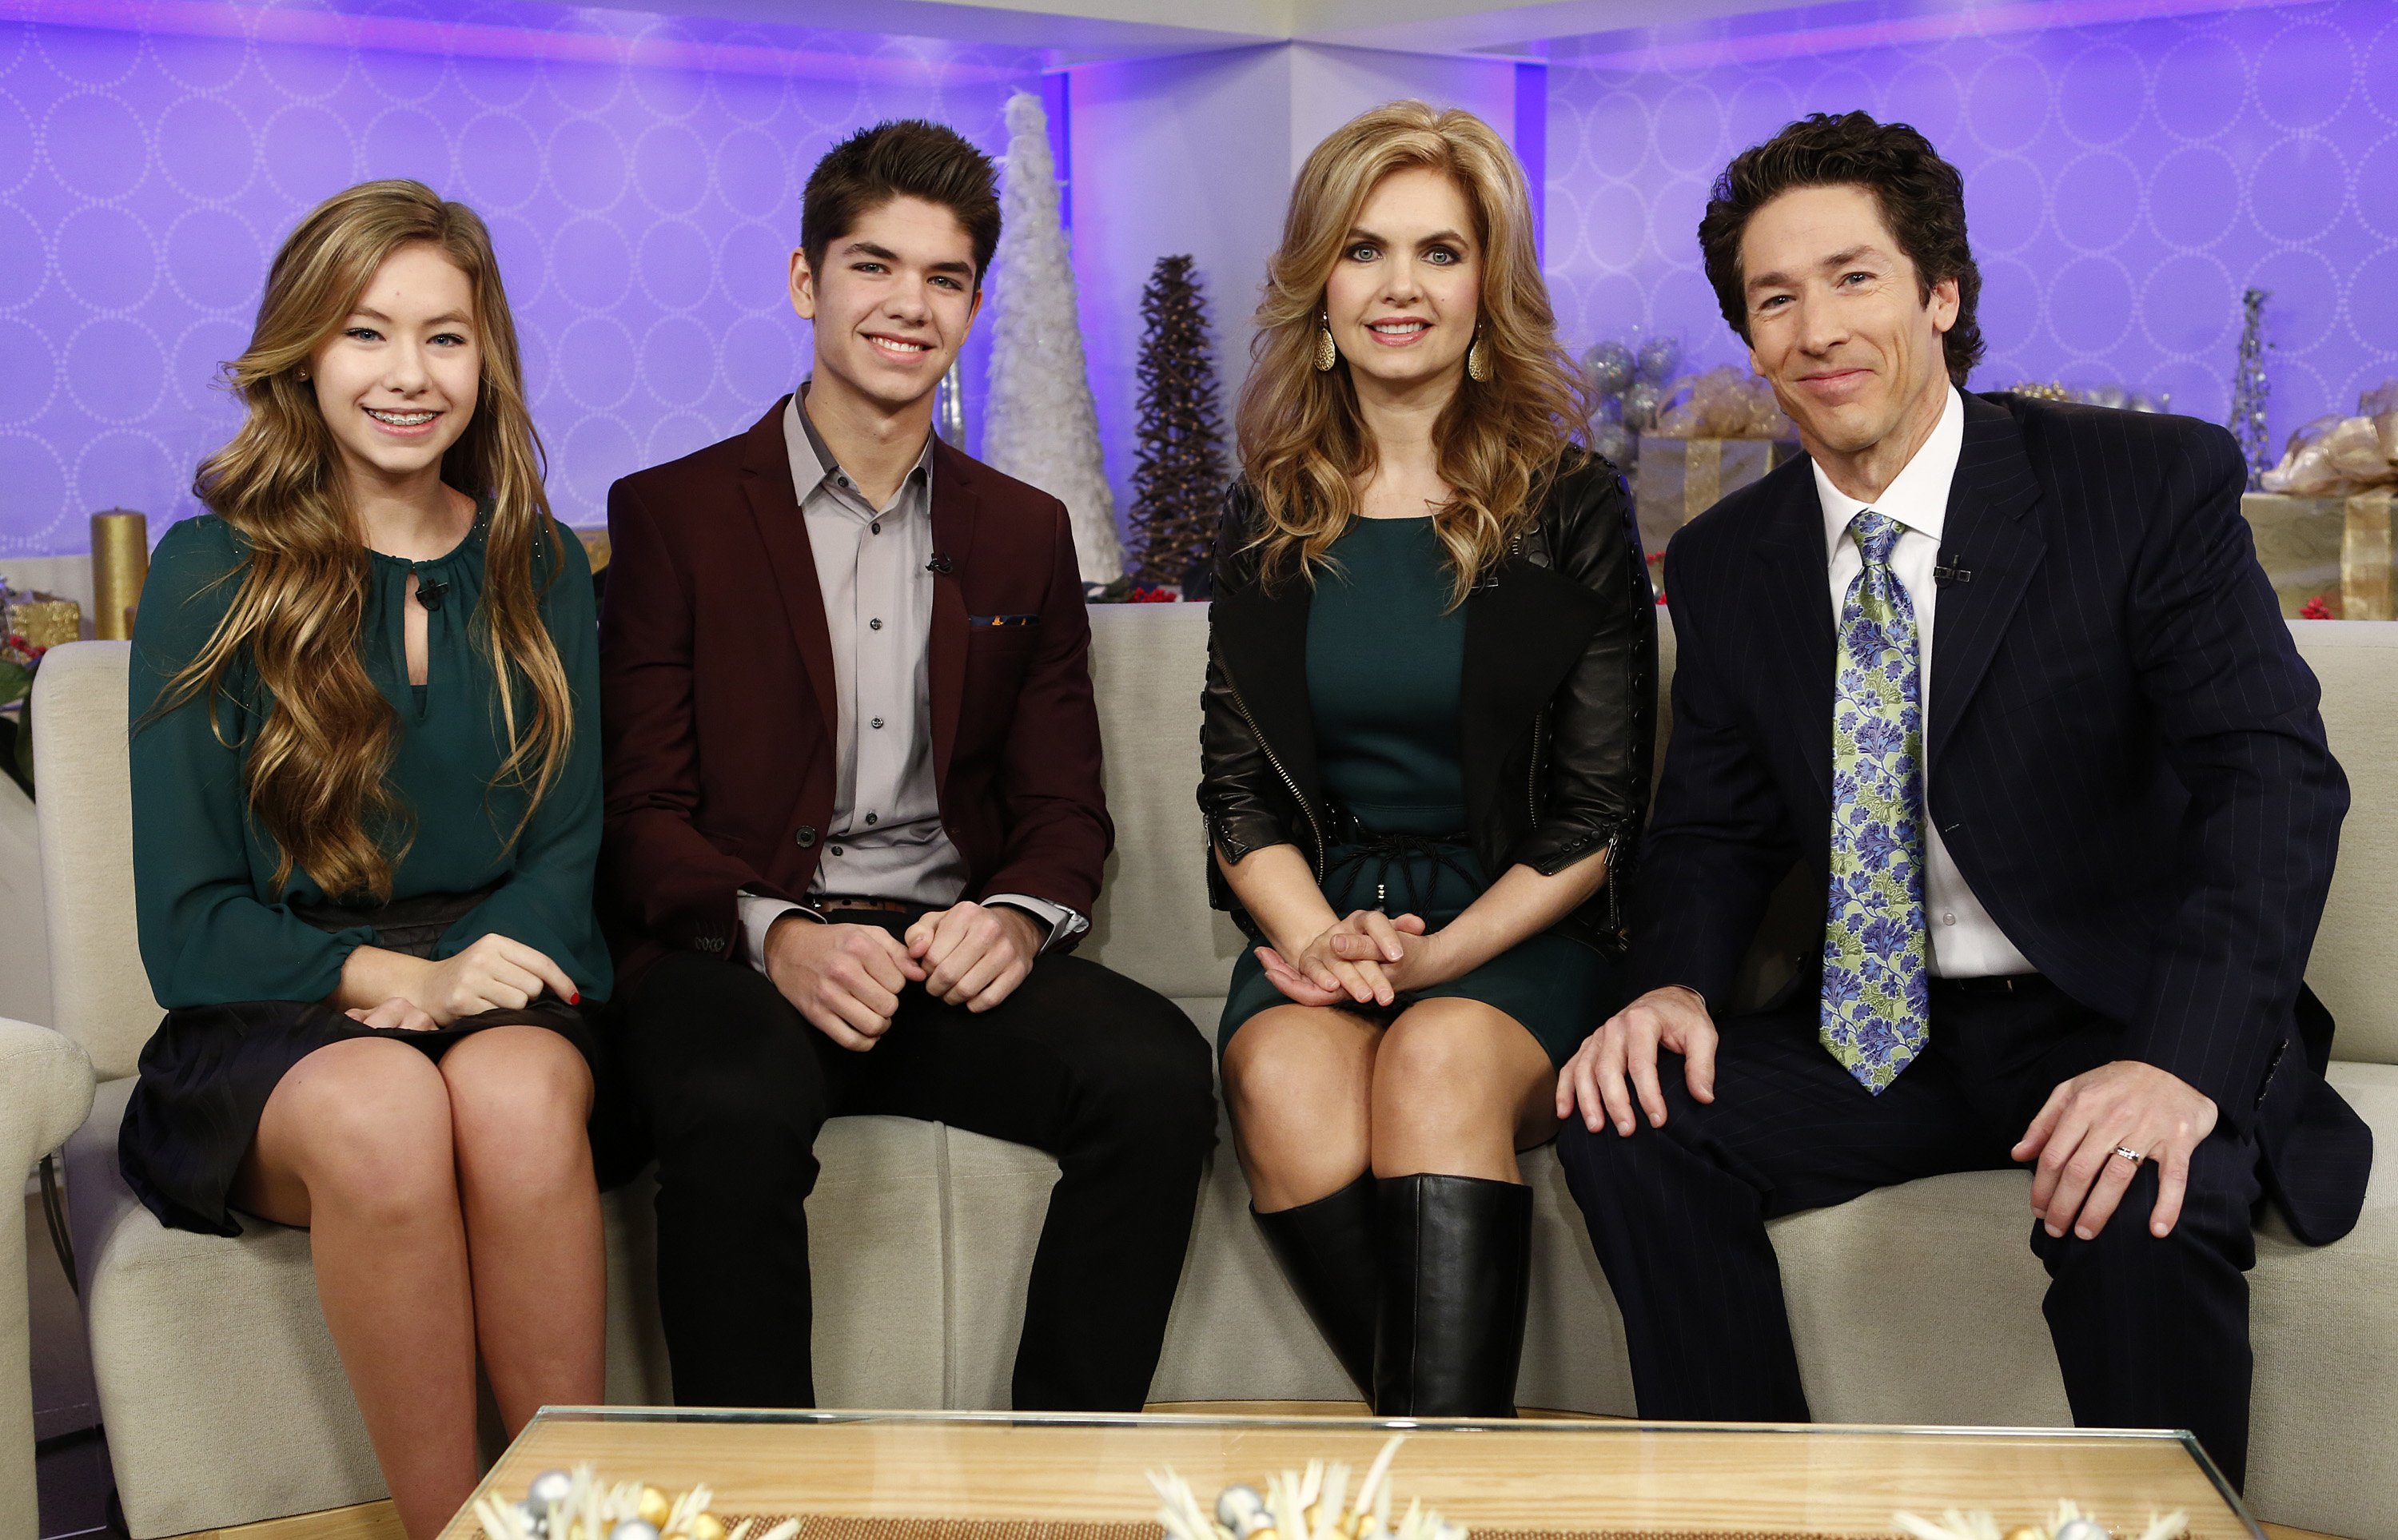 Alexandra Osteen, Jonathan Osteen, Victoria Osteen, and Joel Osteen on the "Today" show on December 17, 2012. | Source: Getty Images